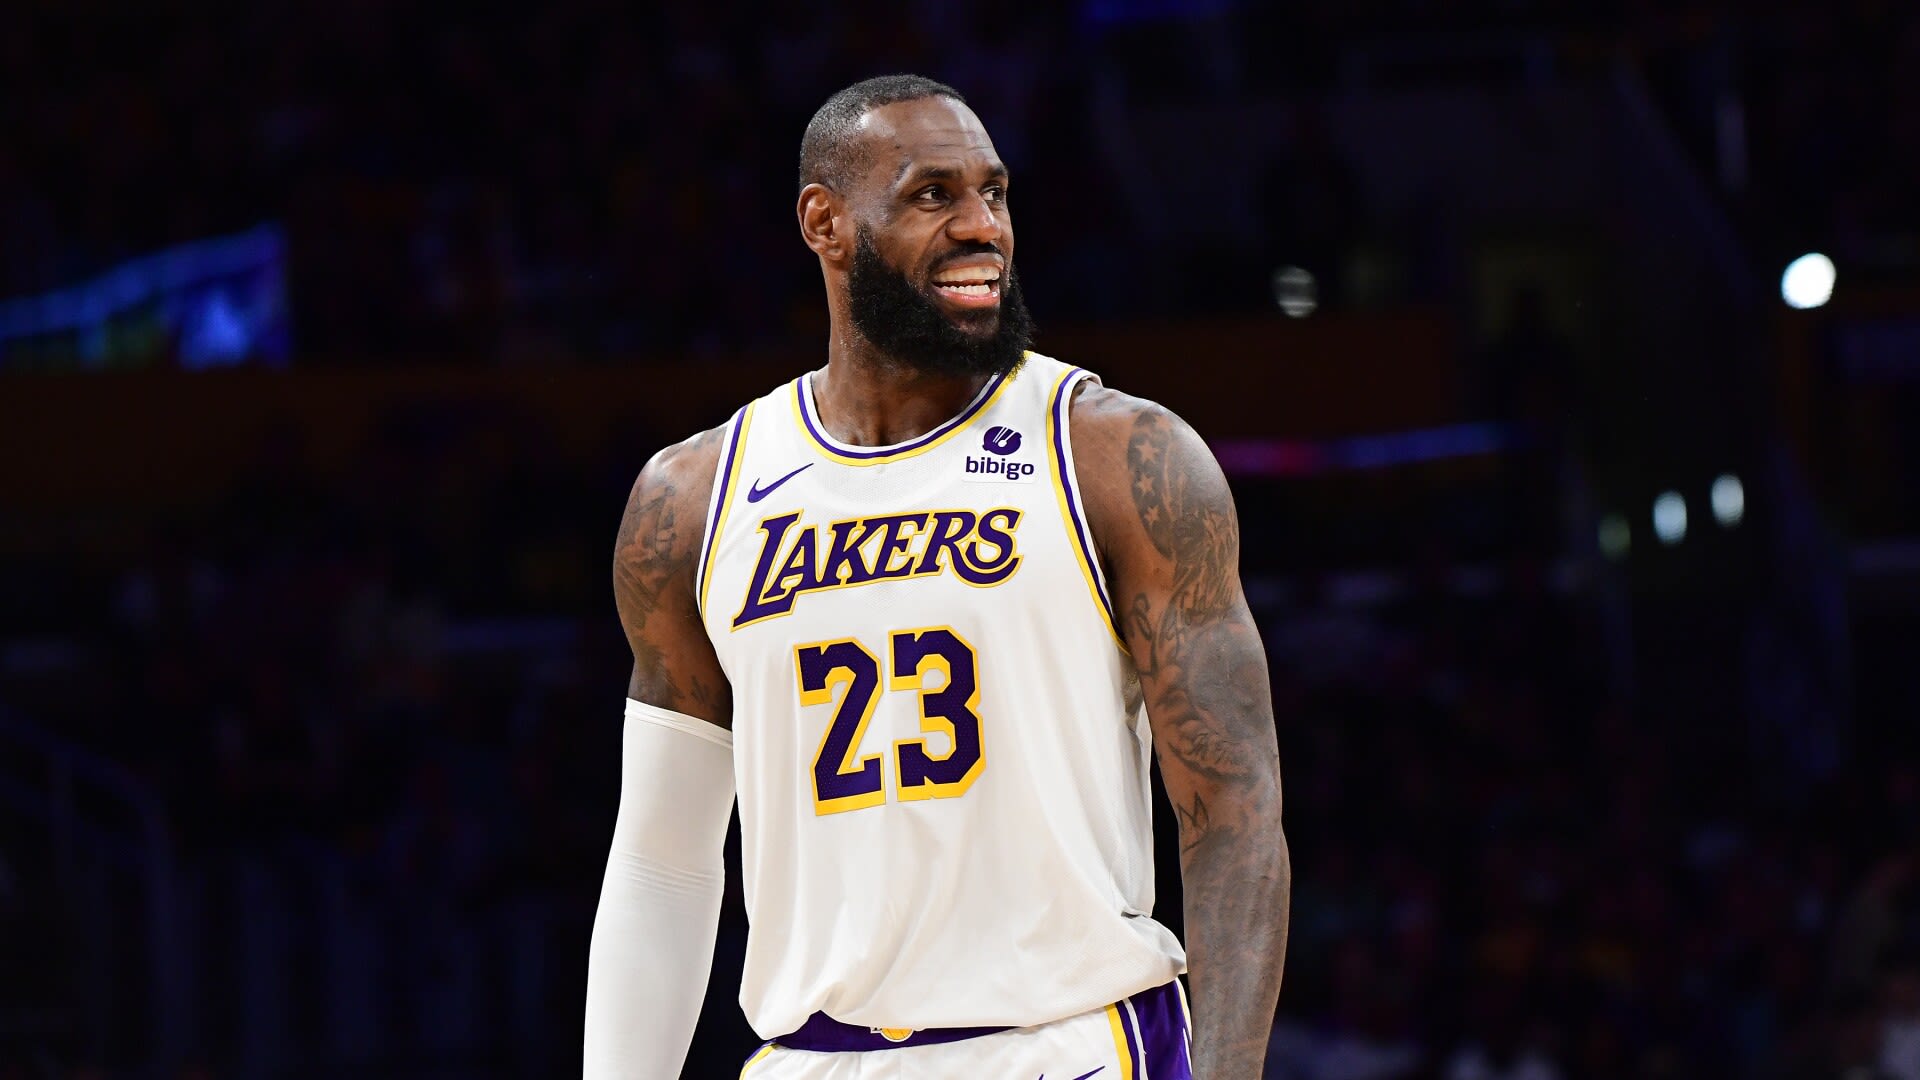 LeBron James could opt for free agency, agent Rich Paul's comment hints on TNT